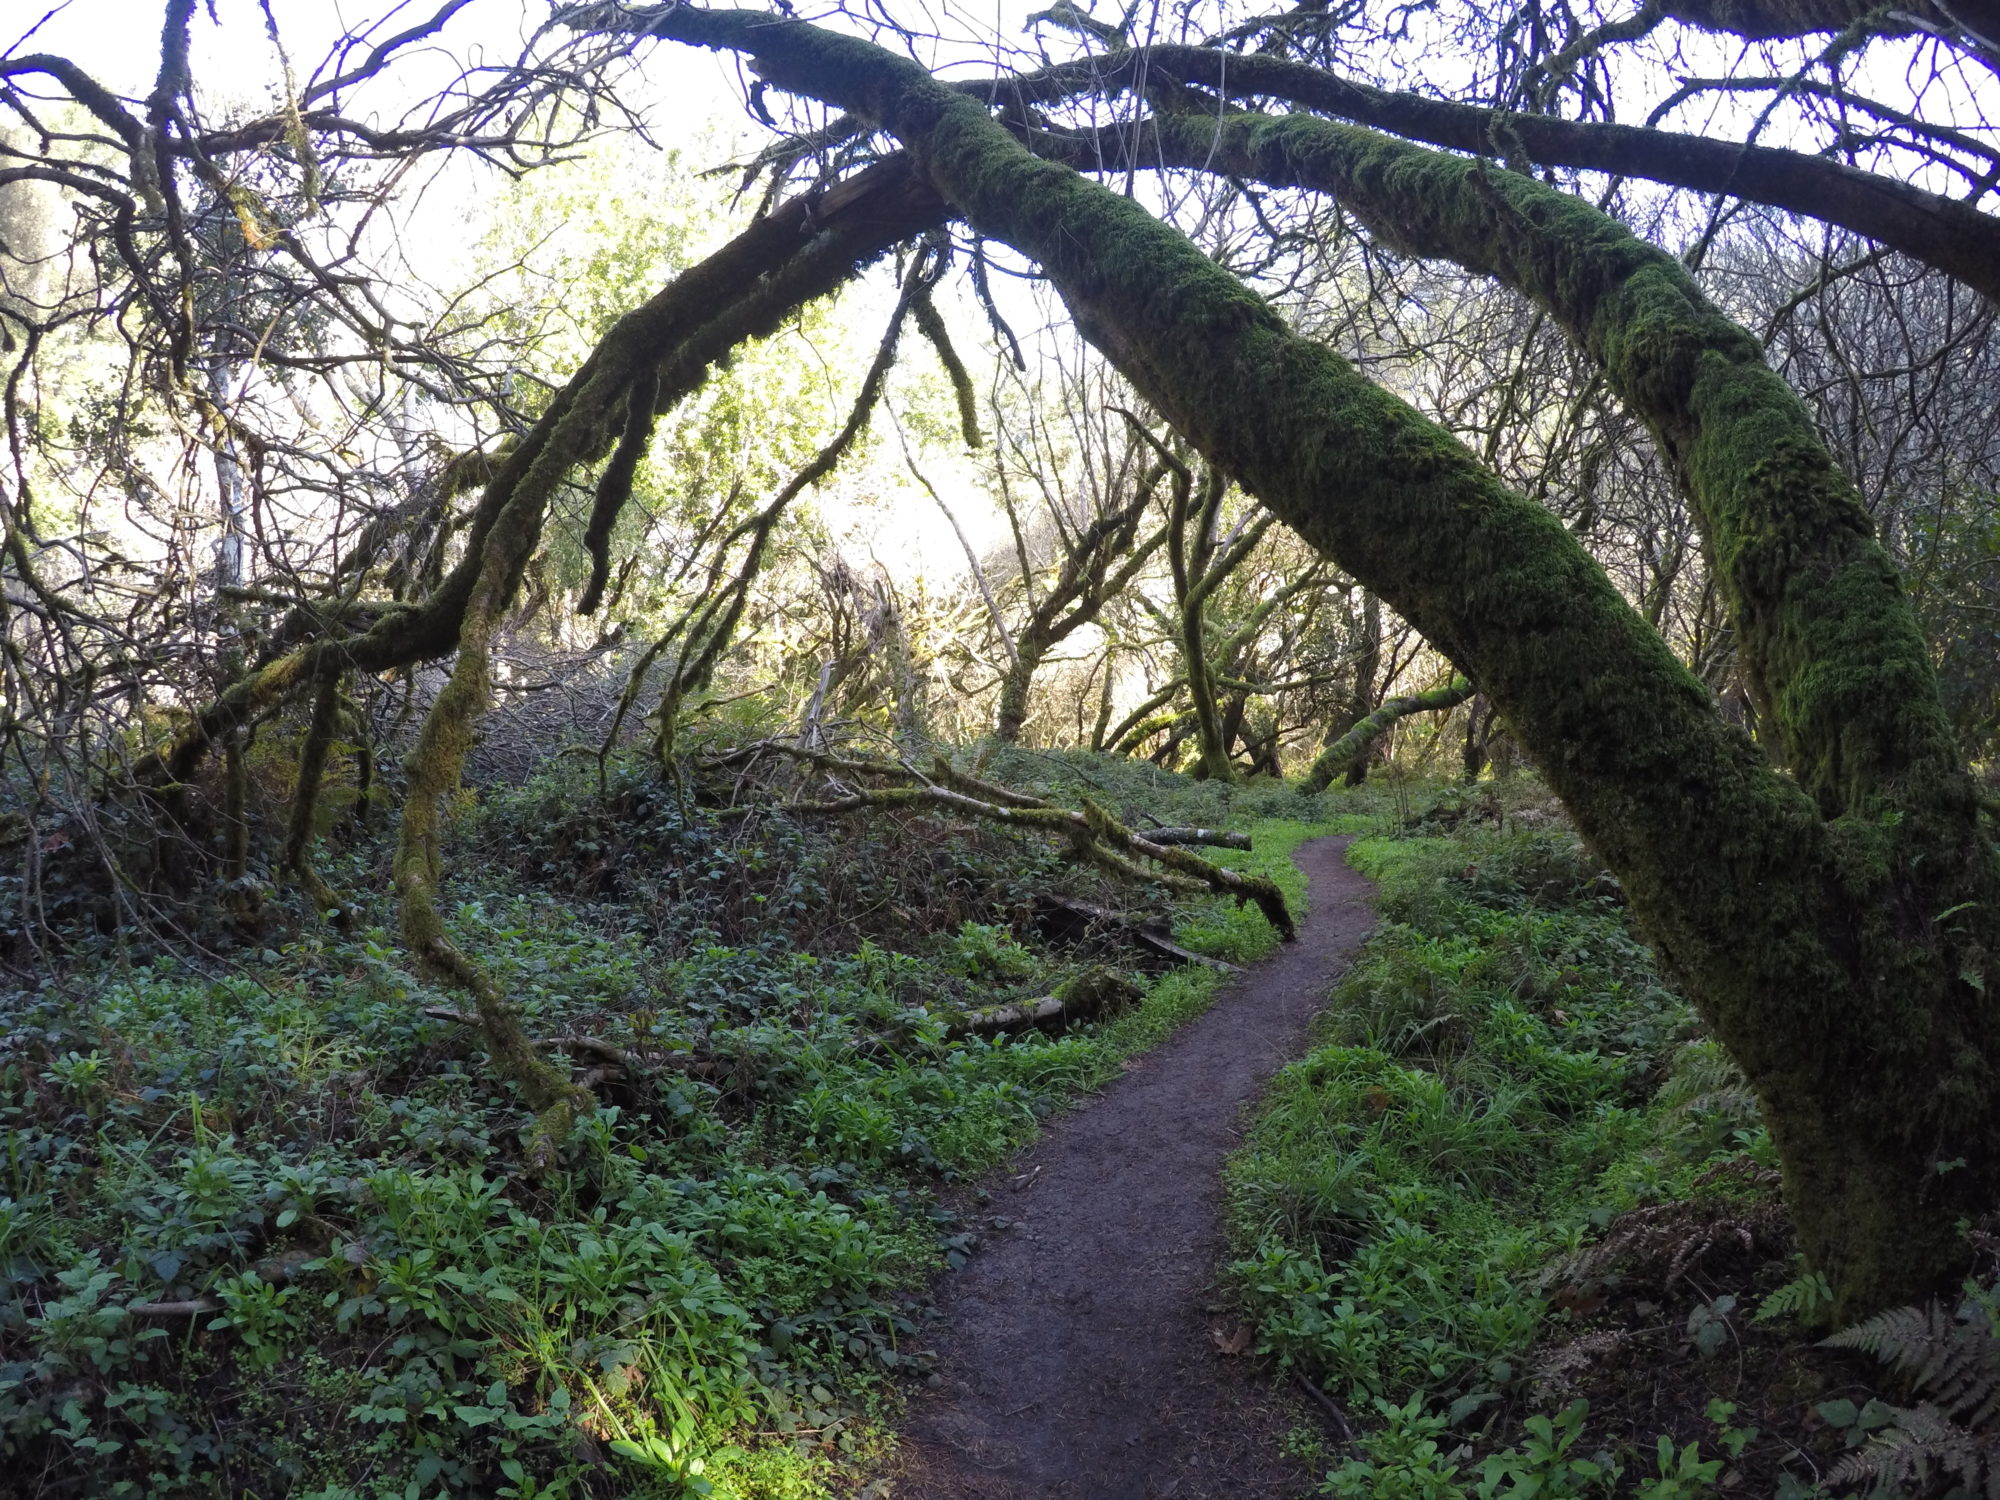 Please help maintain our trails – Join us Sat Jan 28th at DeLaveaga Park!